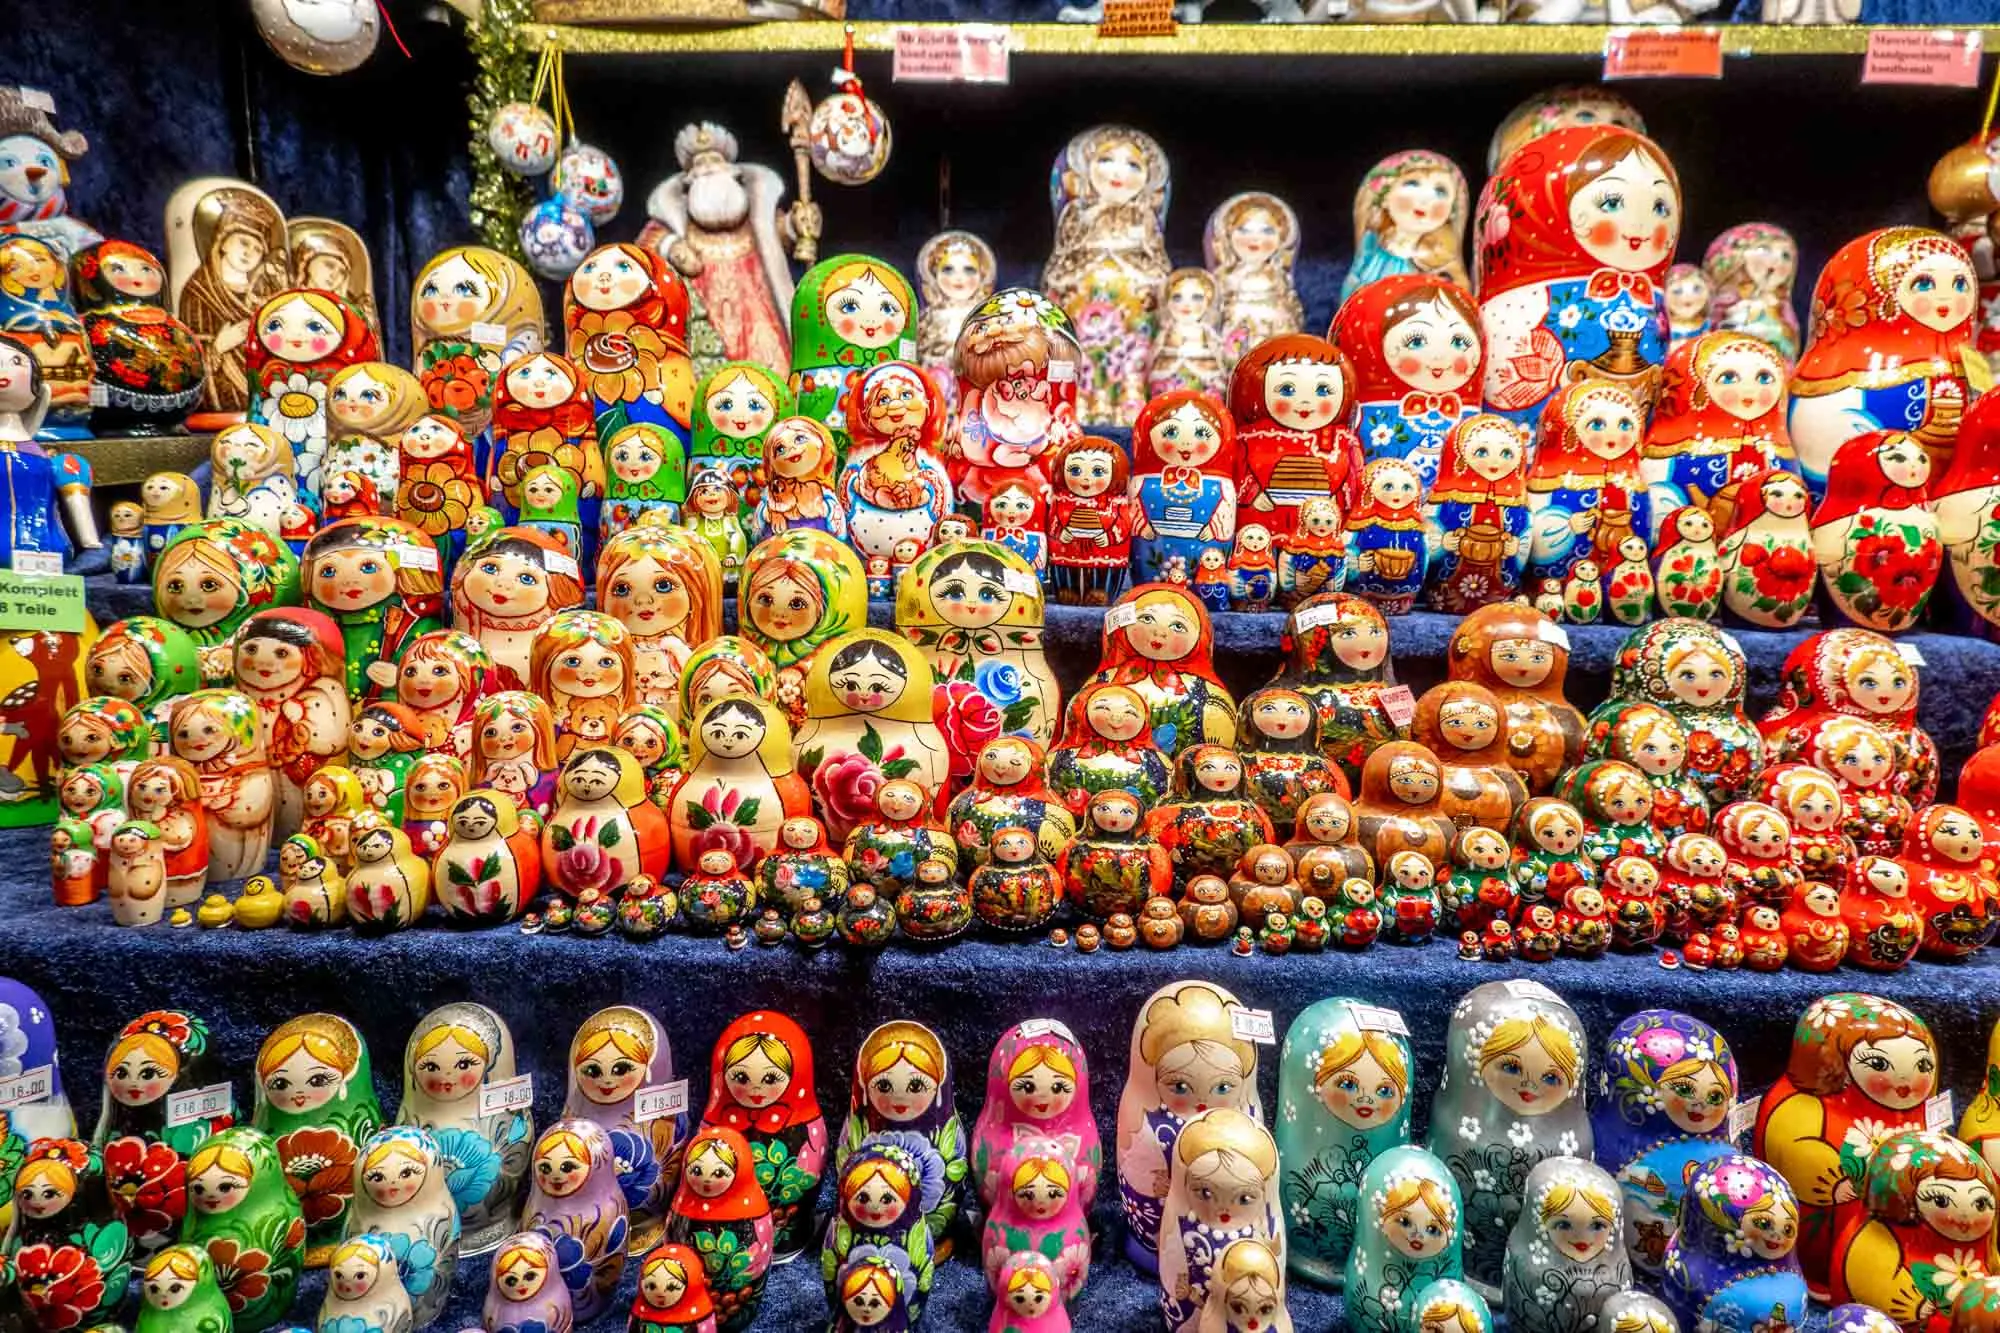 Rows of dolls in many colors of different sizes